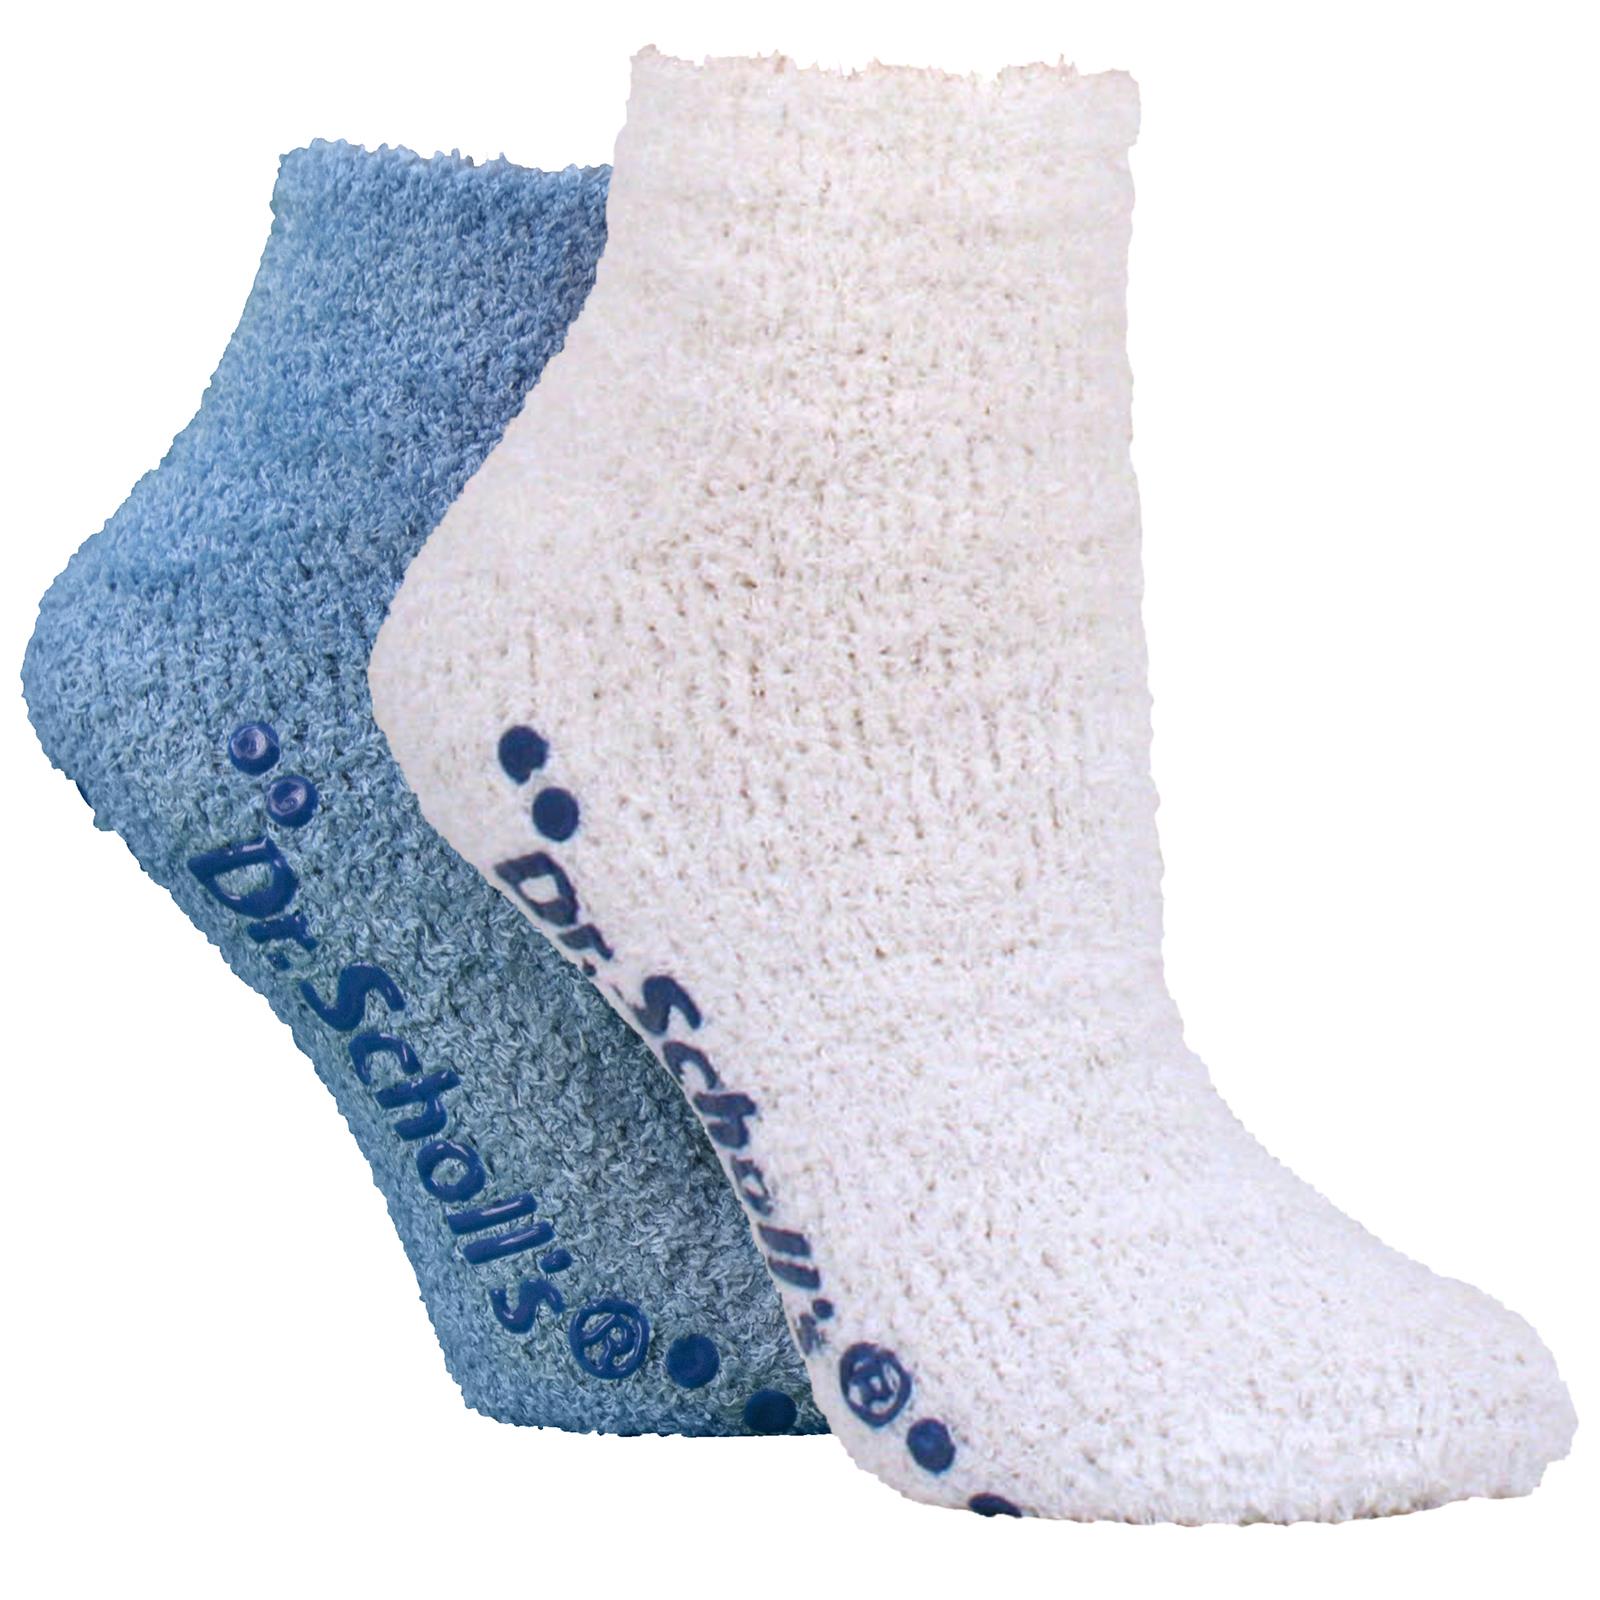 Women's Low Cut Spa Socks With Grippers 2 Pack - image 1 of 2